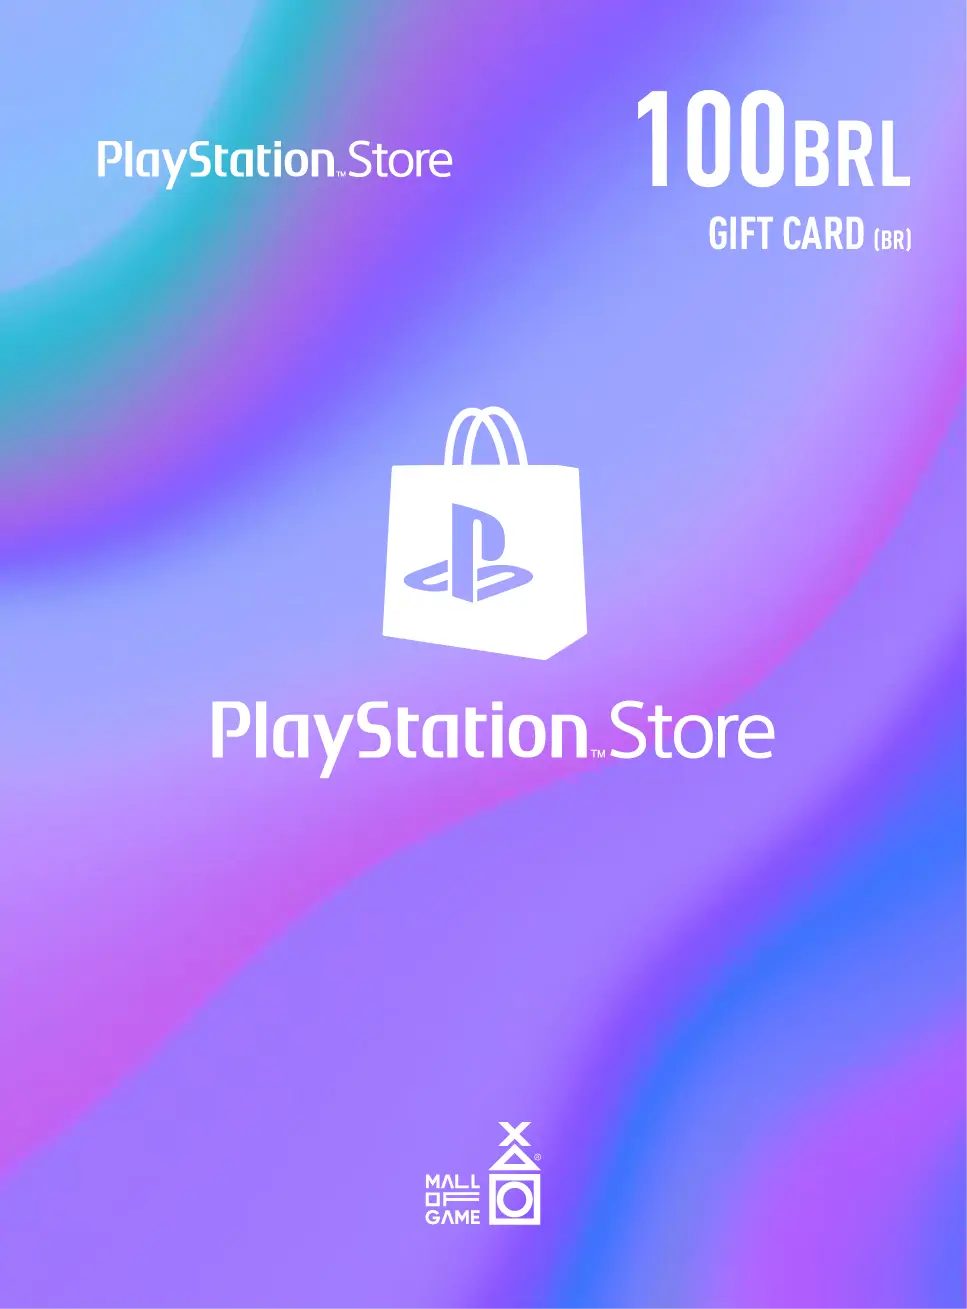 PlayStation™Store BRL100 Gift Cards (BR)